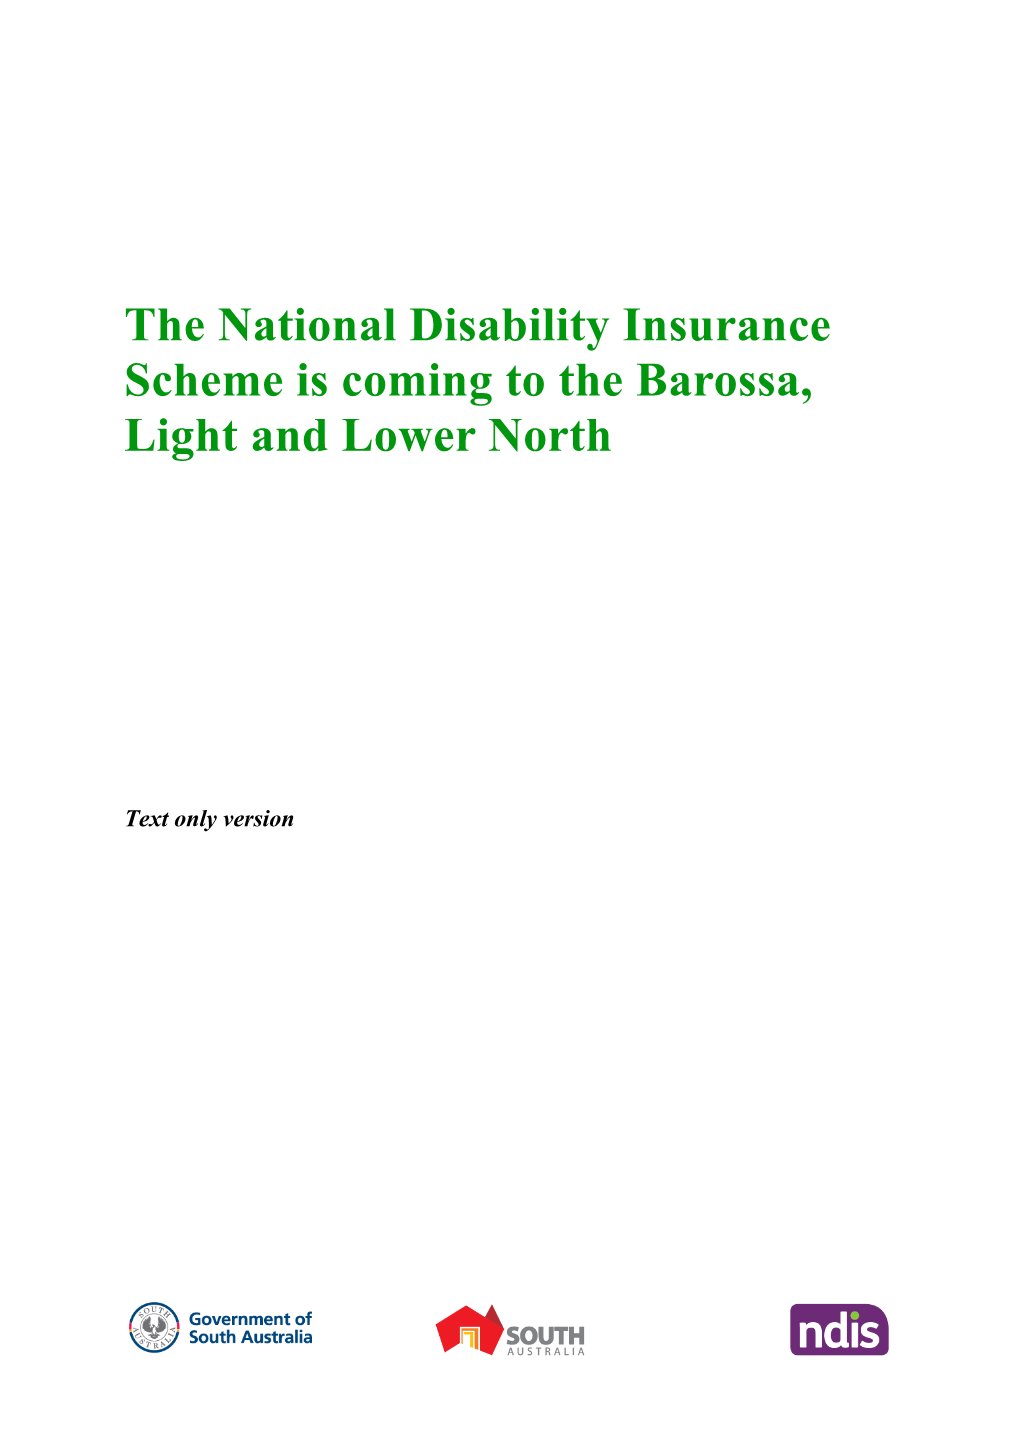 The National Disability Insurance Scheme Is Coming to the Barossa, Light and Lower North